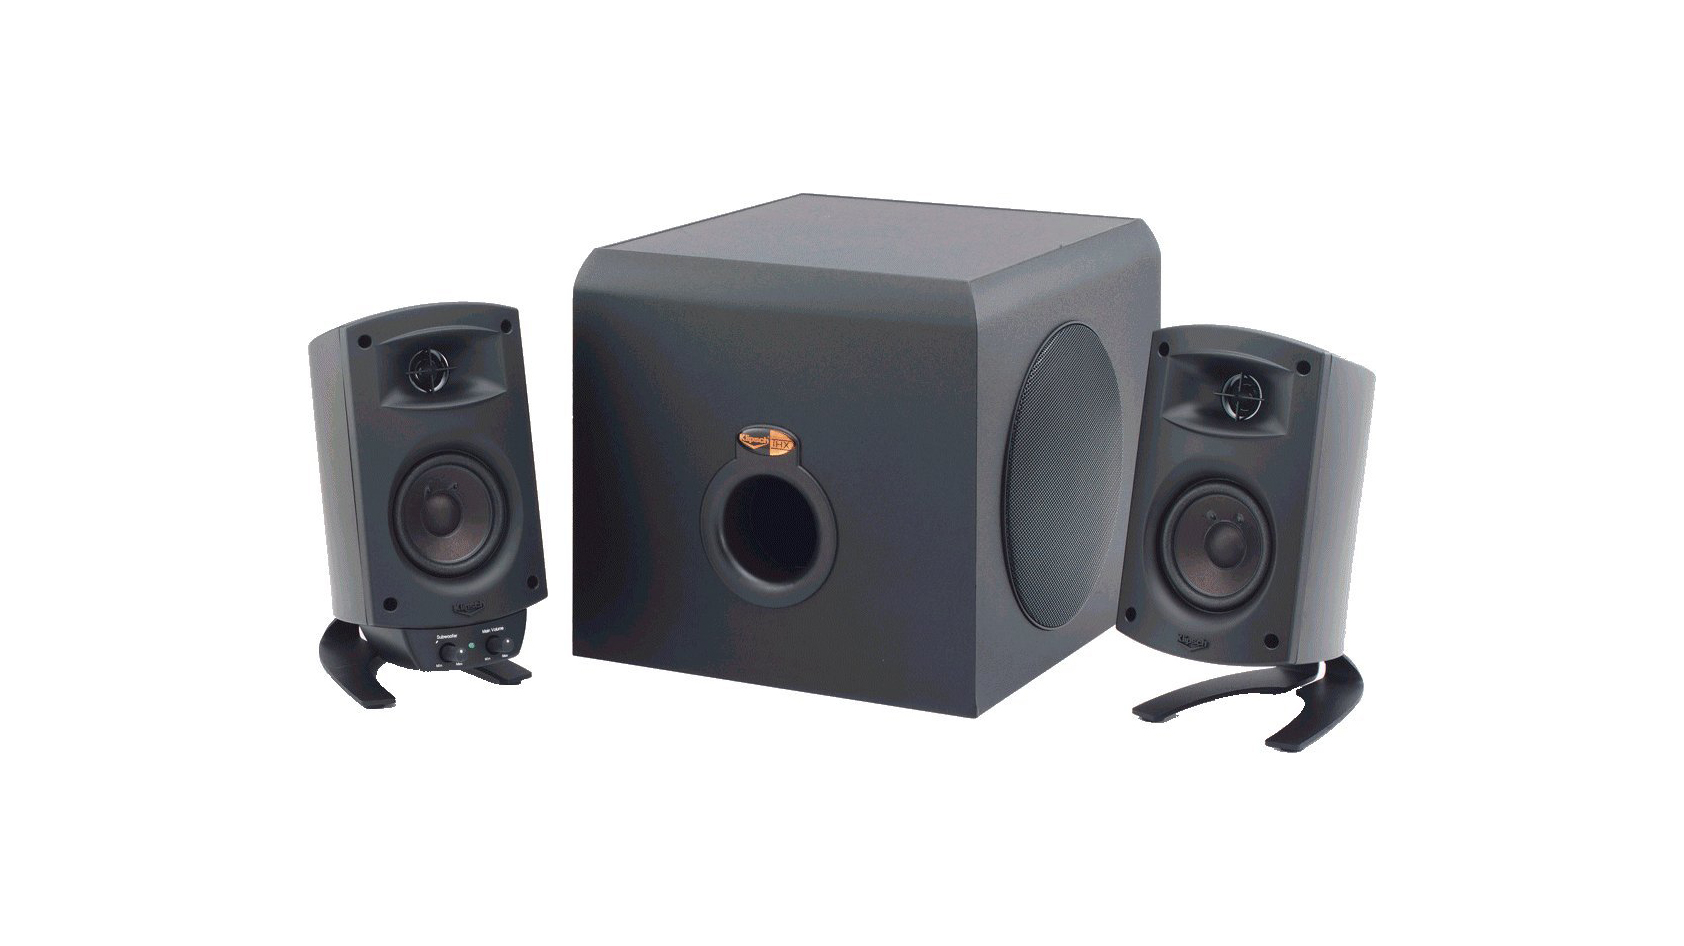 A product image of a Klipsch 2.1 system that consists of two speakers and a subwoofer.